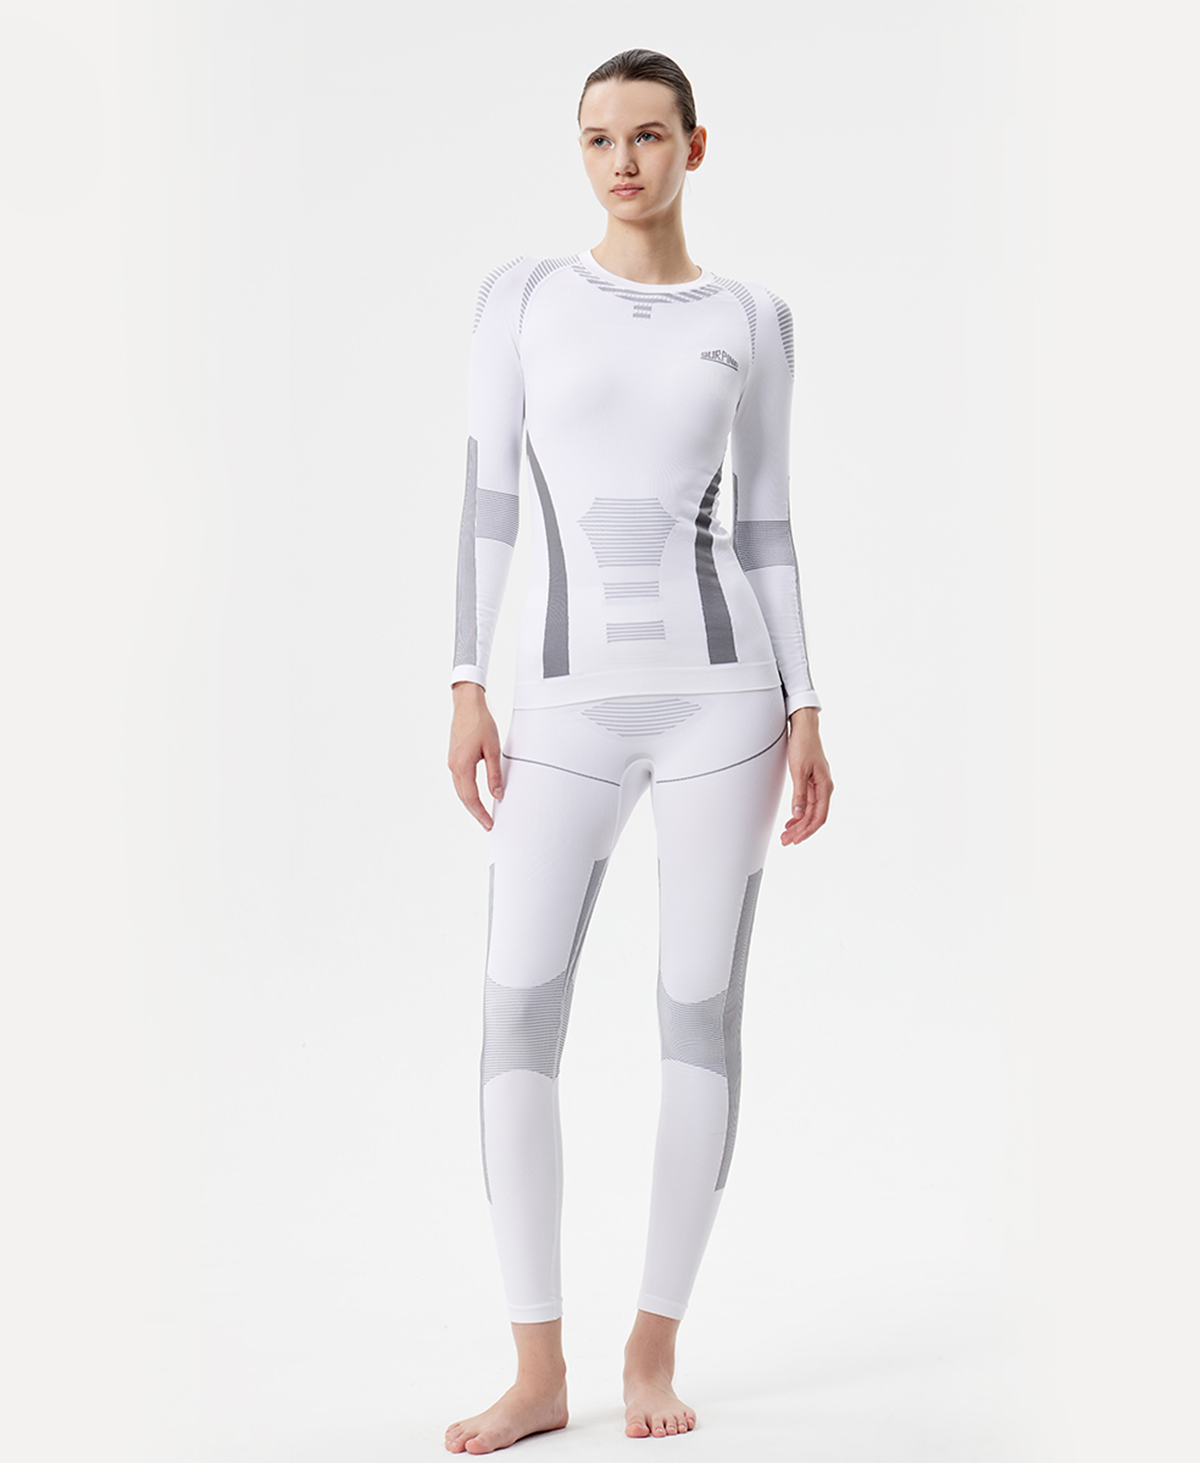 COMPRESSION THERMAL BASELAYER